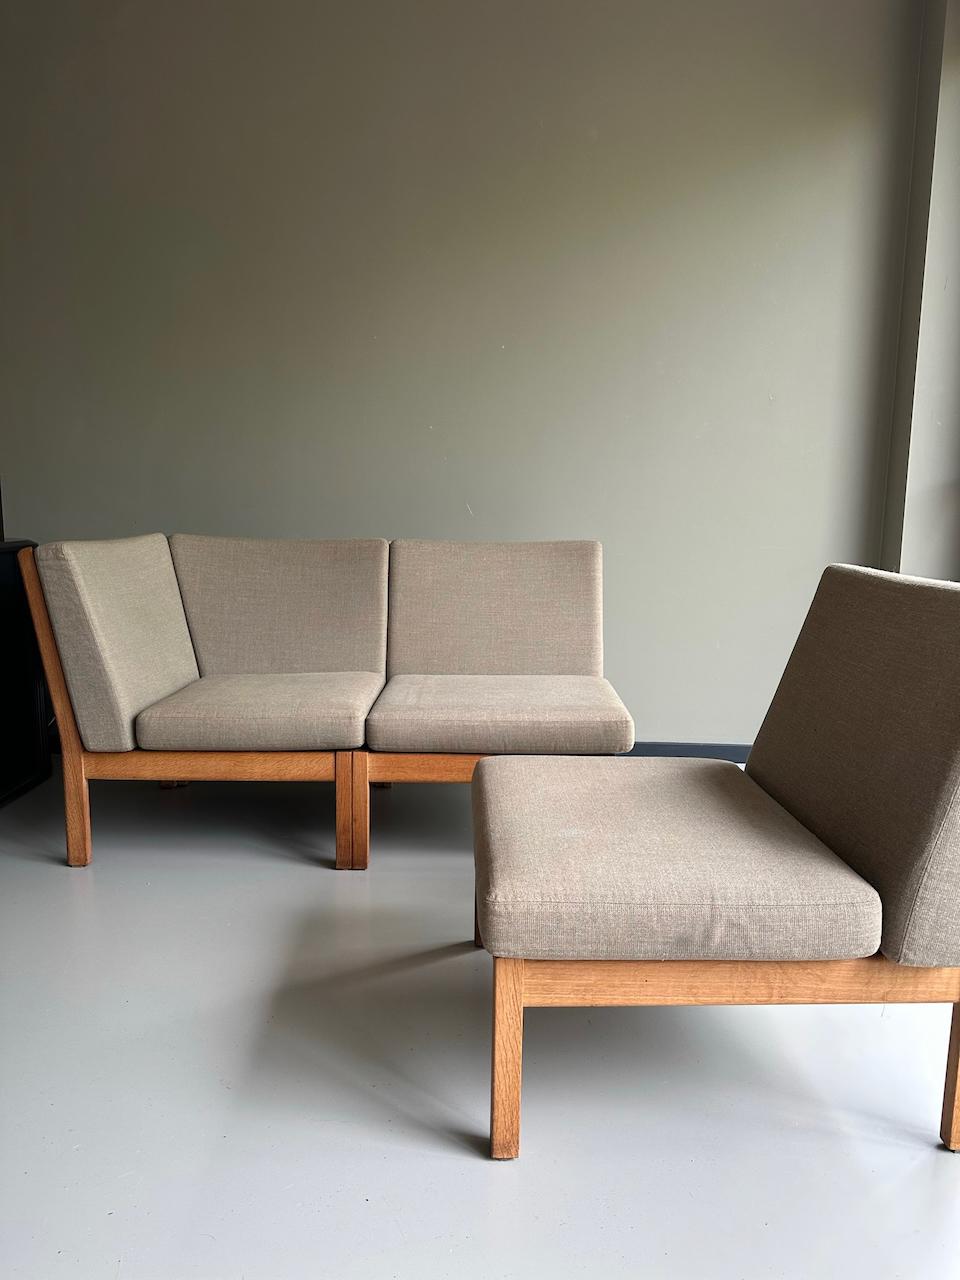 Three piece modular sofa, model GE 280 by design grandmaster Hans J. Wegner for GETAMA.
Beautiful minimalistic design from Denmark.
Very comfortable sofa that can be arranged to your liking.
The elements connector together with original clamps for